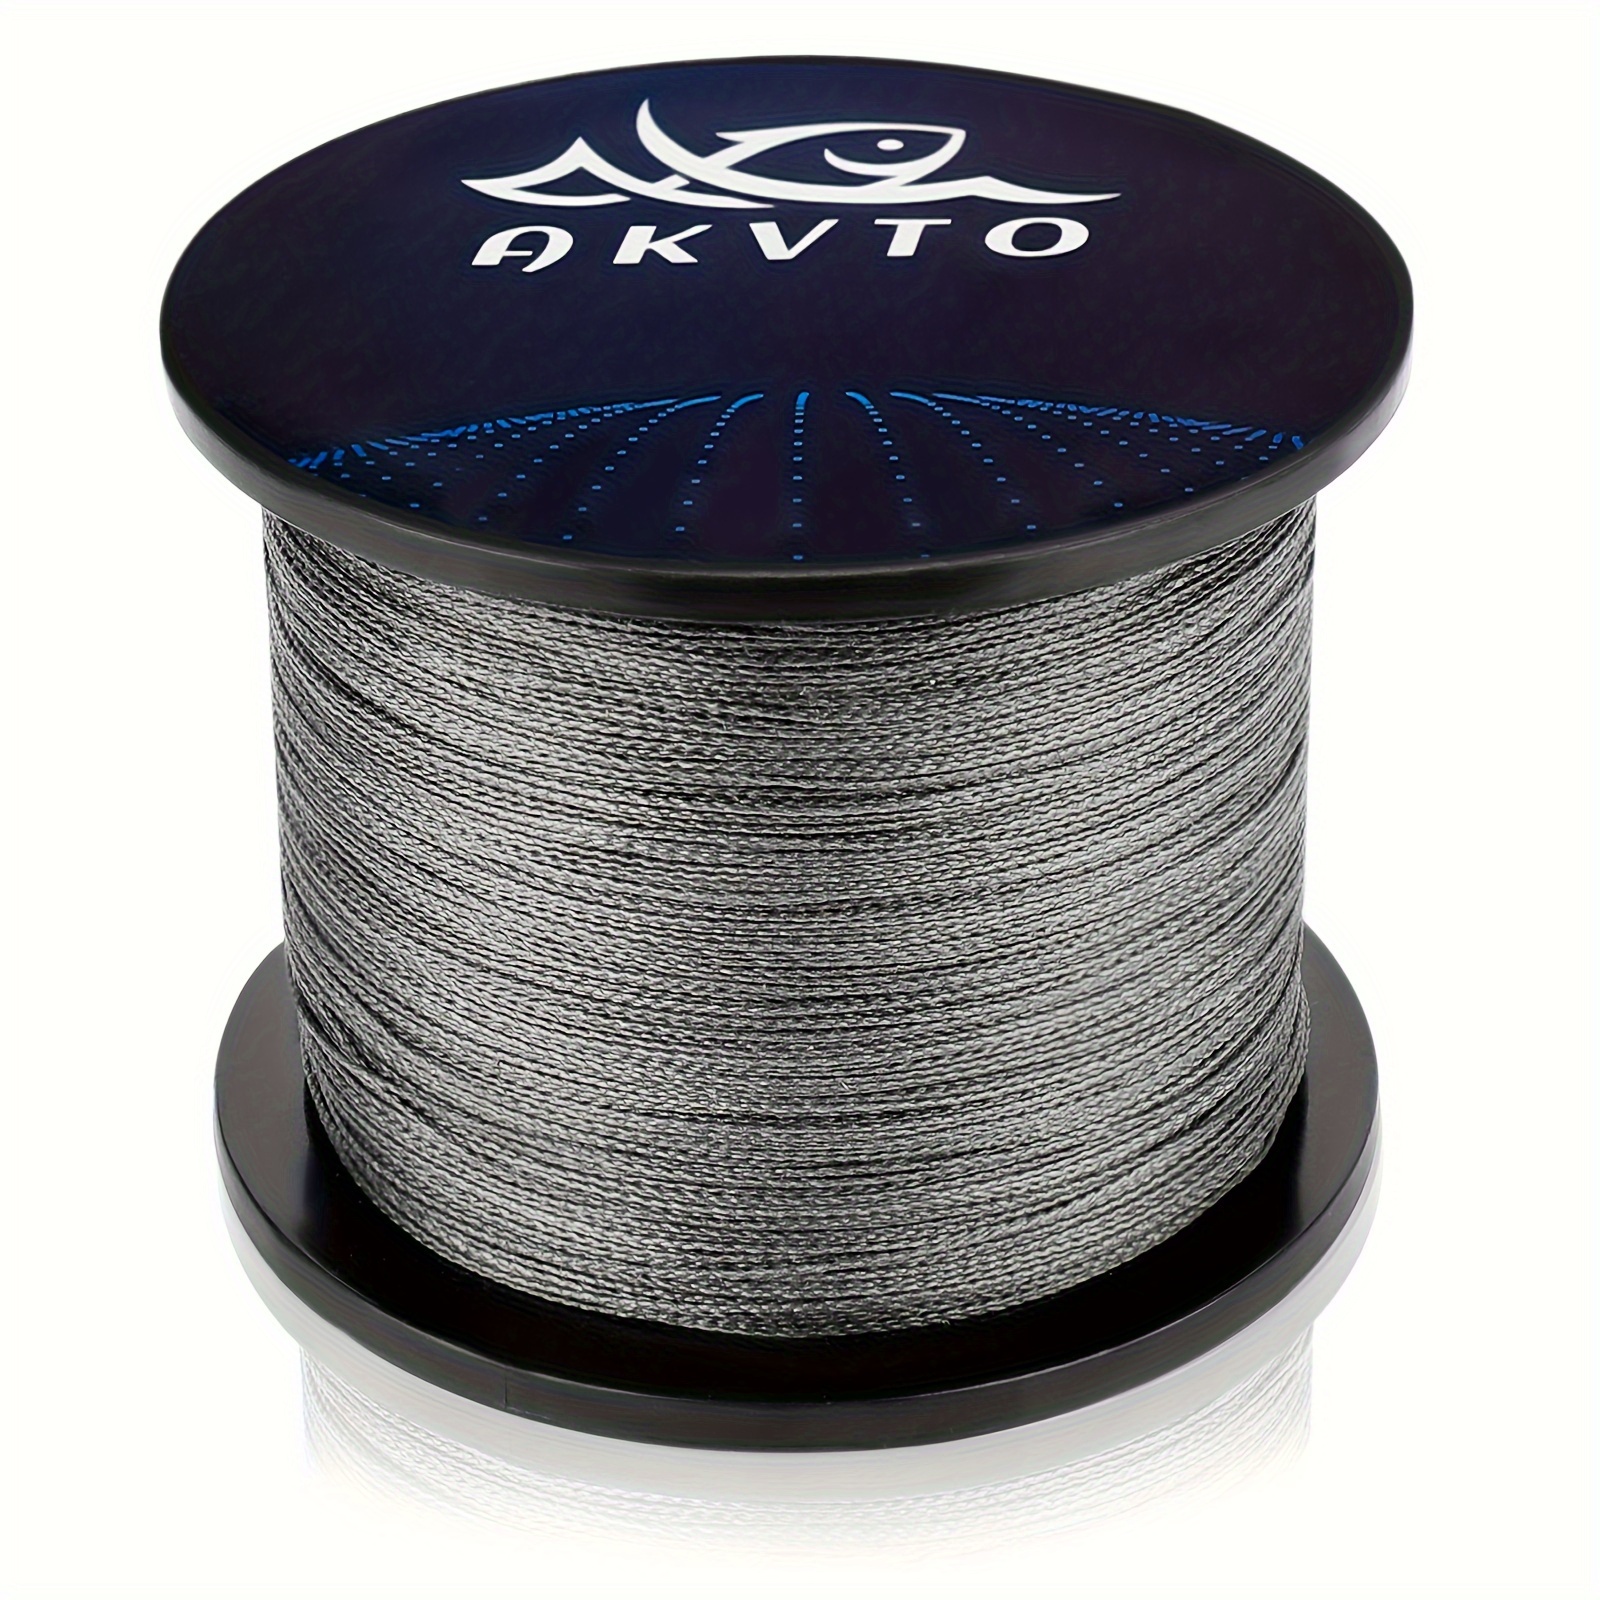 19685.04inchSuper Strong Fishing Line, 8-Strand Multifilament PE  Anti-abrasion Braided Line, 12 25 40 60 80 LB For Smooth Long Casting